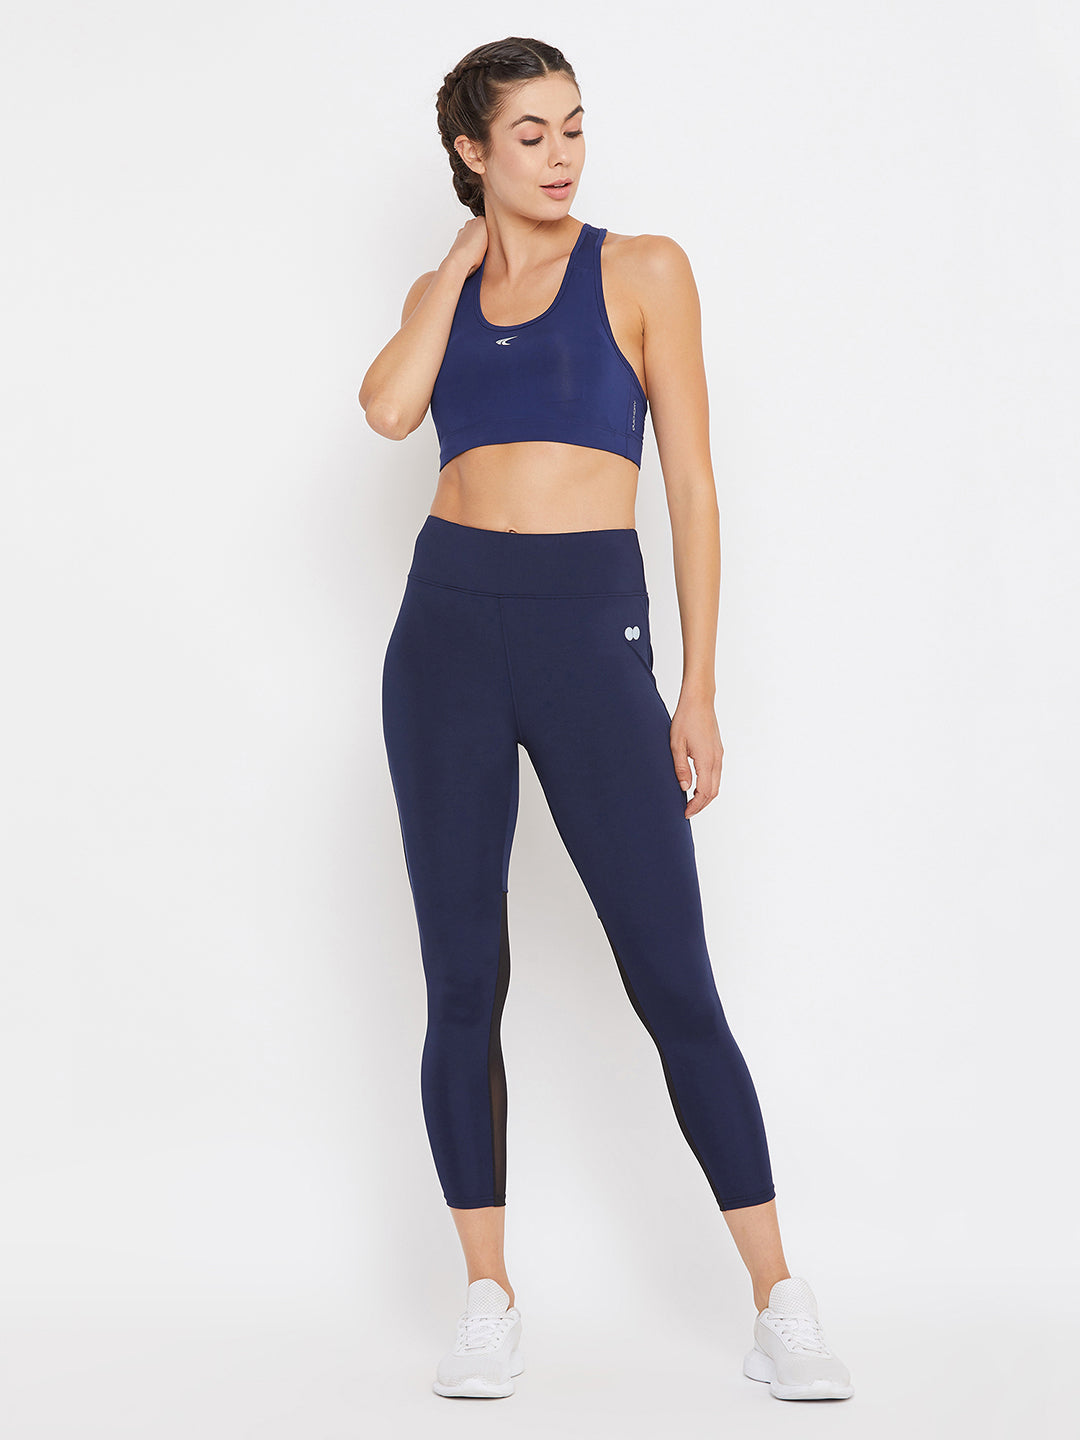 Activewear Ankle Length Tights In Navy